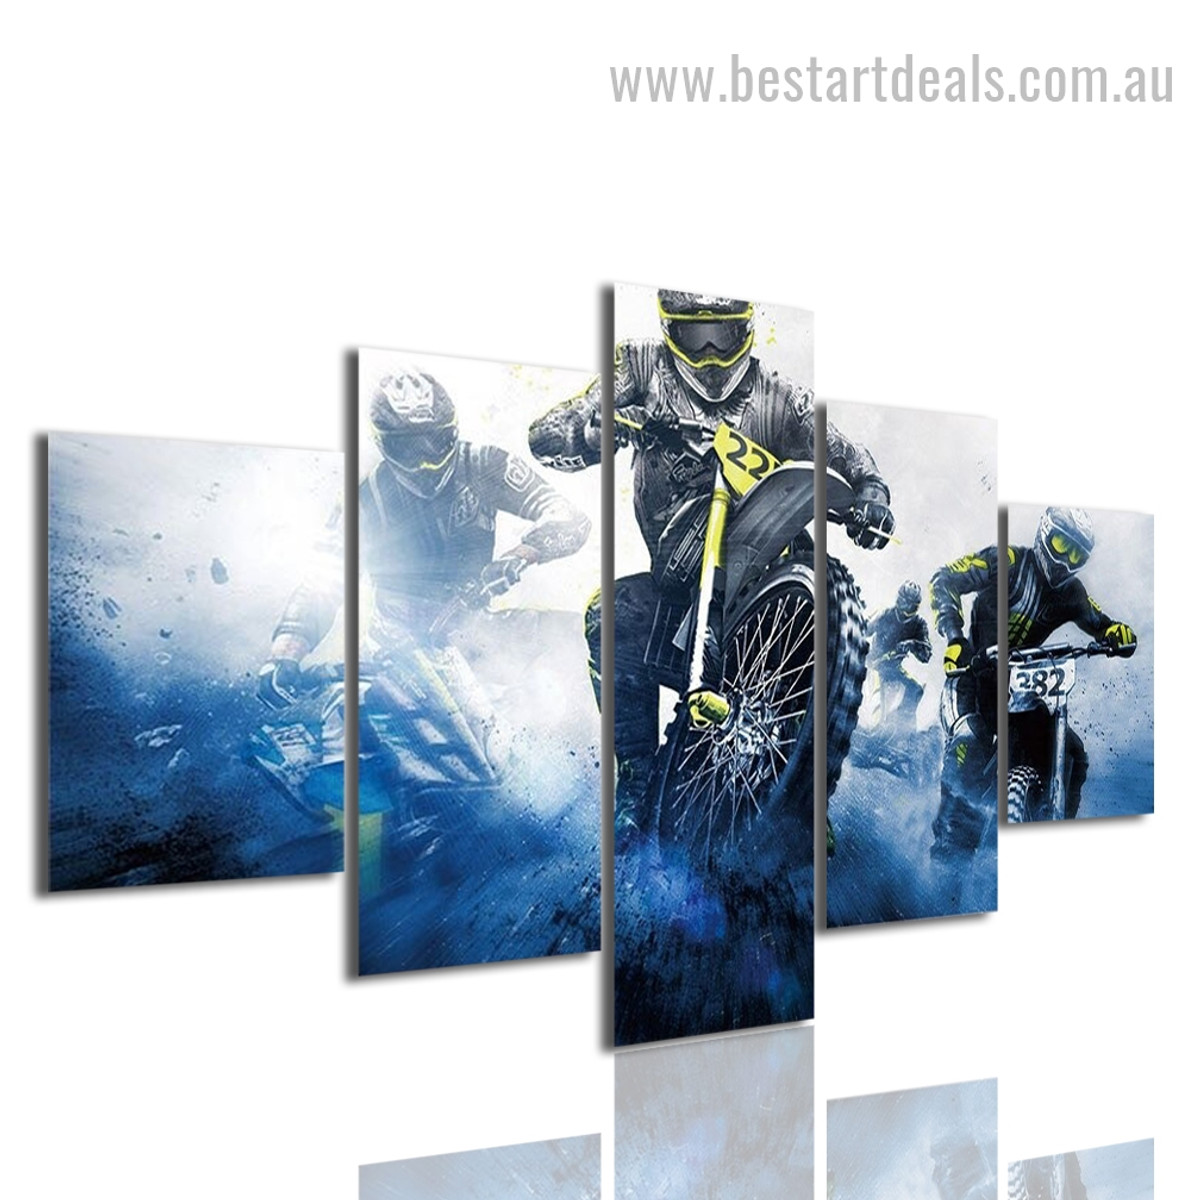 Supercross Championship Abstract Modern Framed Portraiture Picture Canvas Print